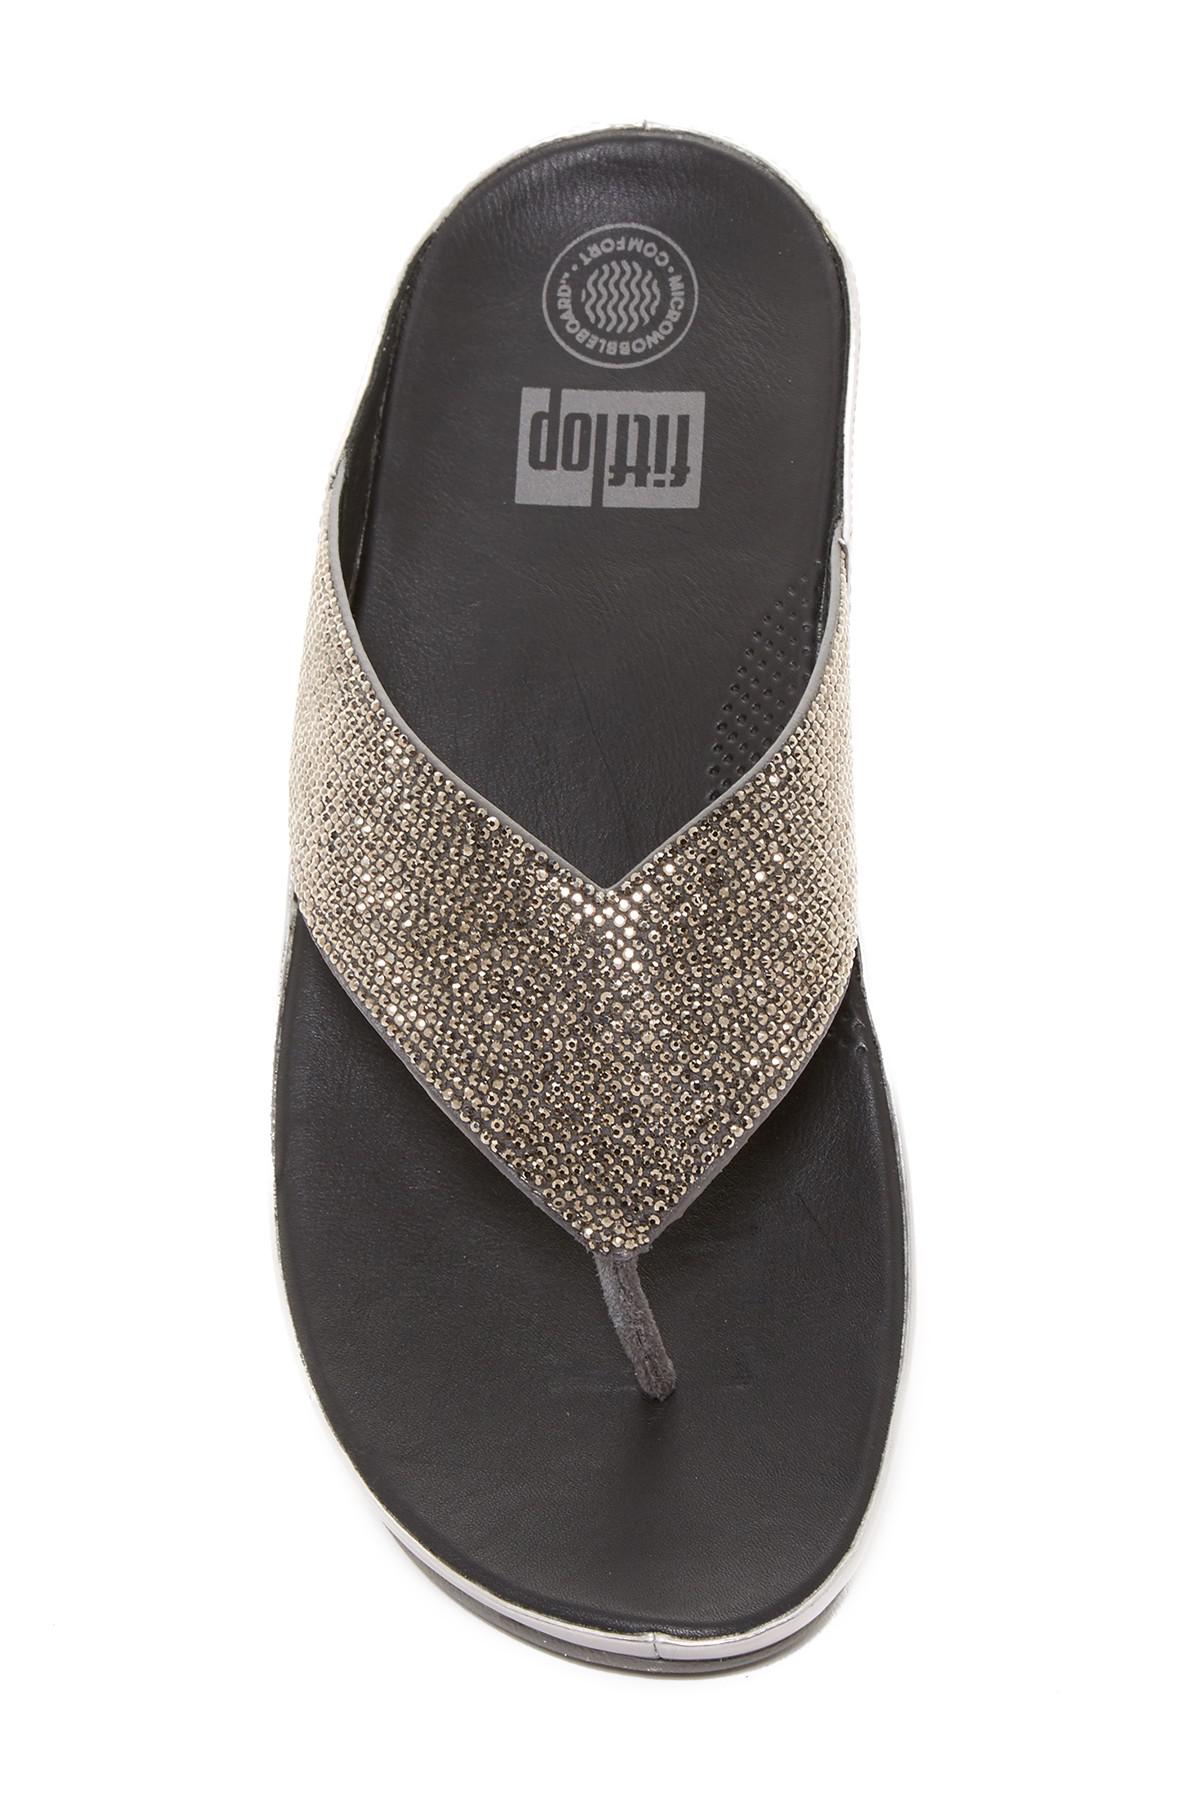 fitflop crystall wedge sandal